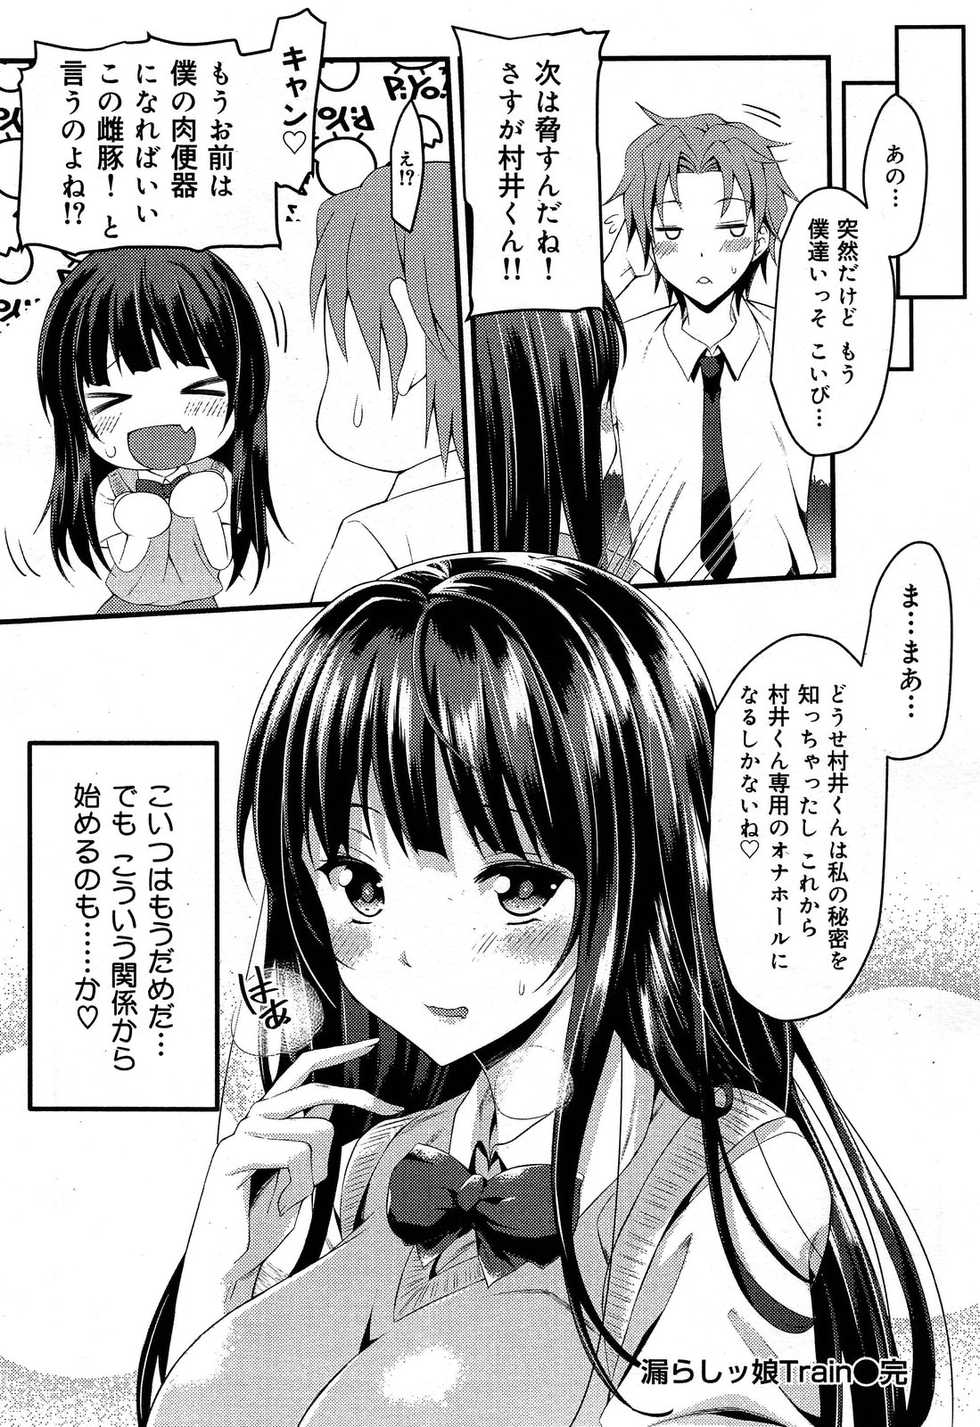 COMIC Maihime Musou Act. 06 2013-07 - Page 30